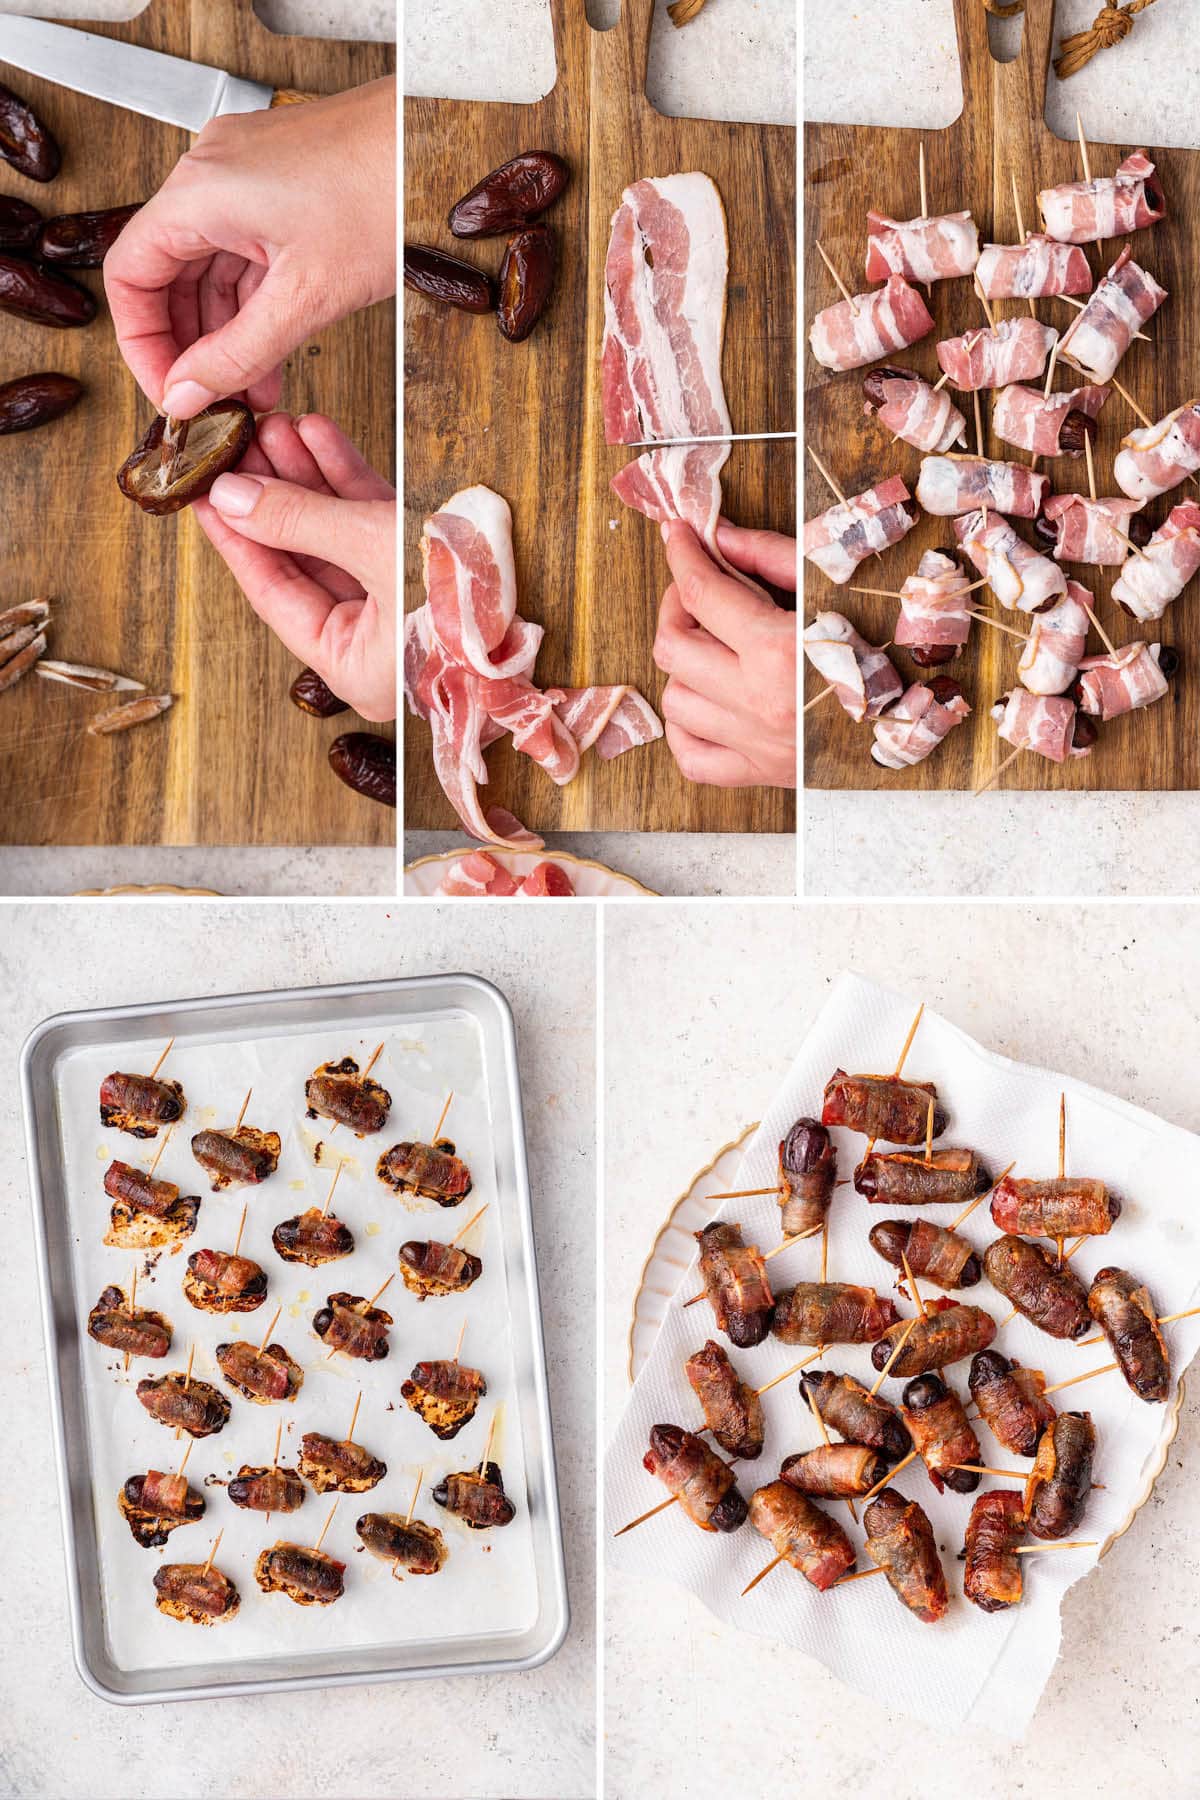 Five photos showing the steps to make Bacon Wrapped Dates: taking pits out of medjool dates, cutting bacon slices in half, wrapping dates with bacon, baking and then draining the fat on a paper towel.